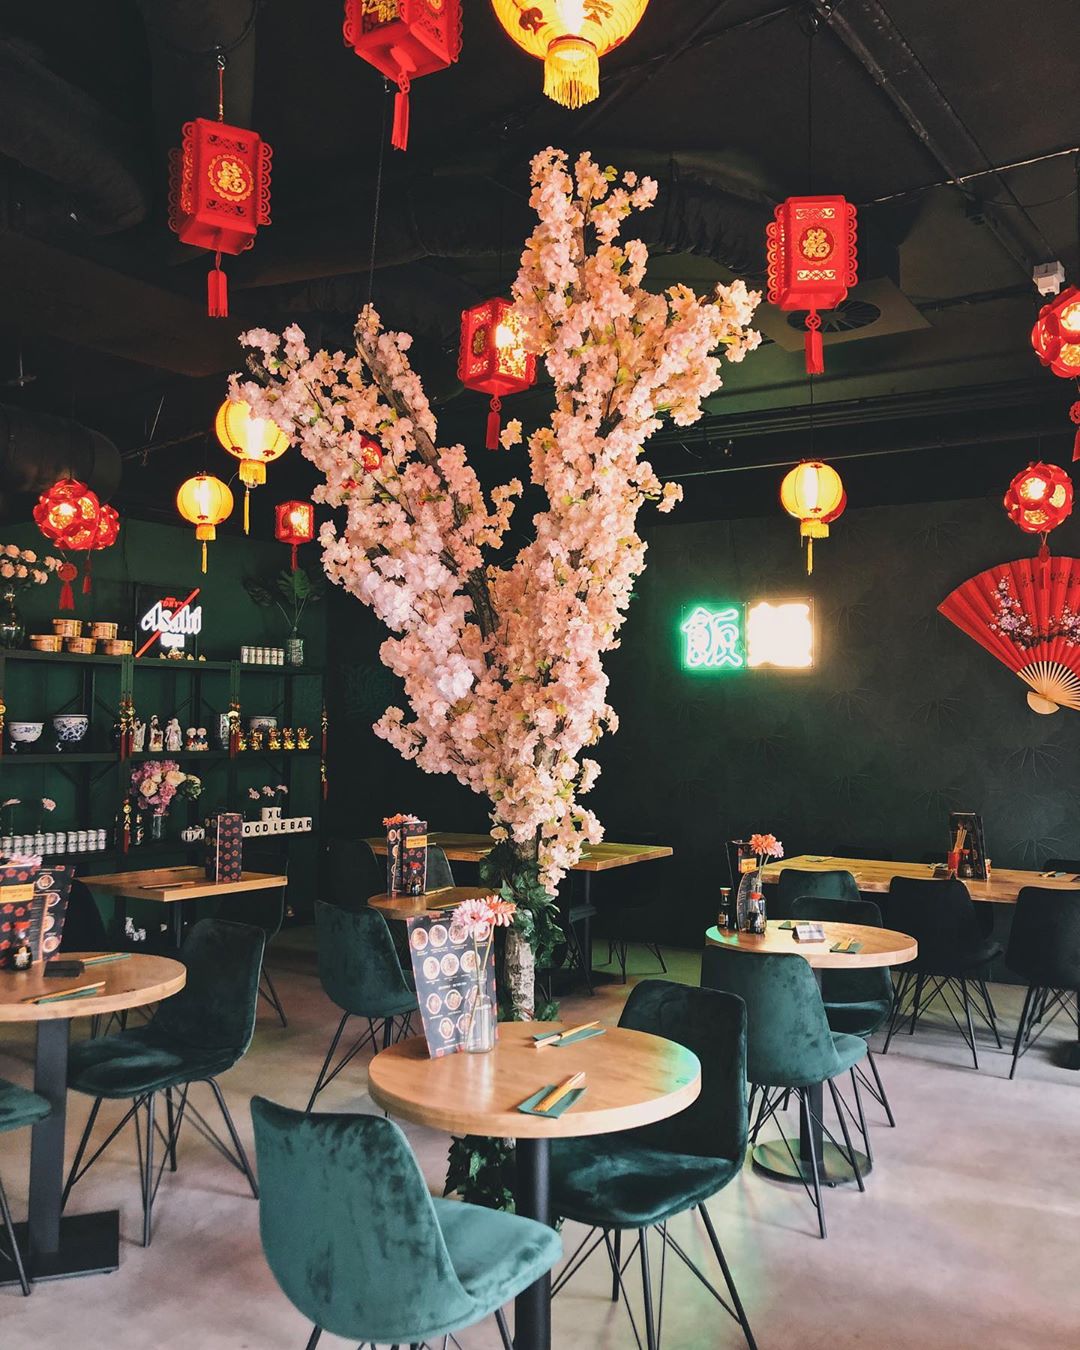 Noodle Soups, Fried Noodles, Ricebowls or Asian Streetfood? No problem! ? You can find all that here at Xu! #XuNoodleBar #Tilburg #InteriorGoals #Sakura #Asahi #Hotspot #SendNoods #Asian #Chinese